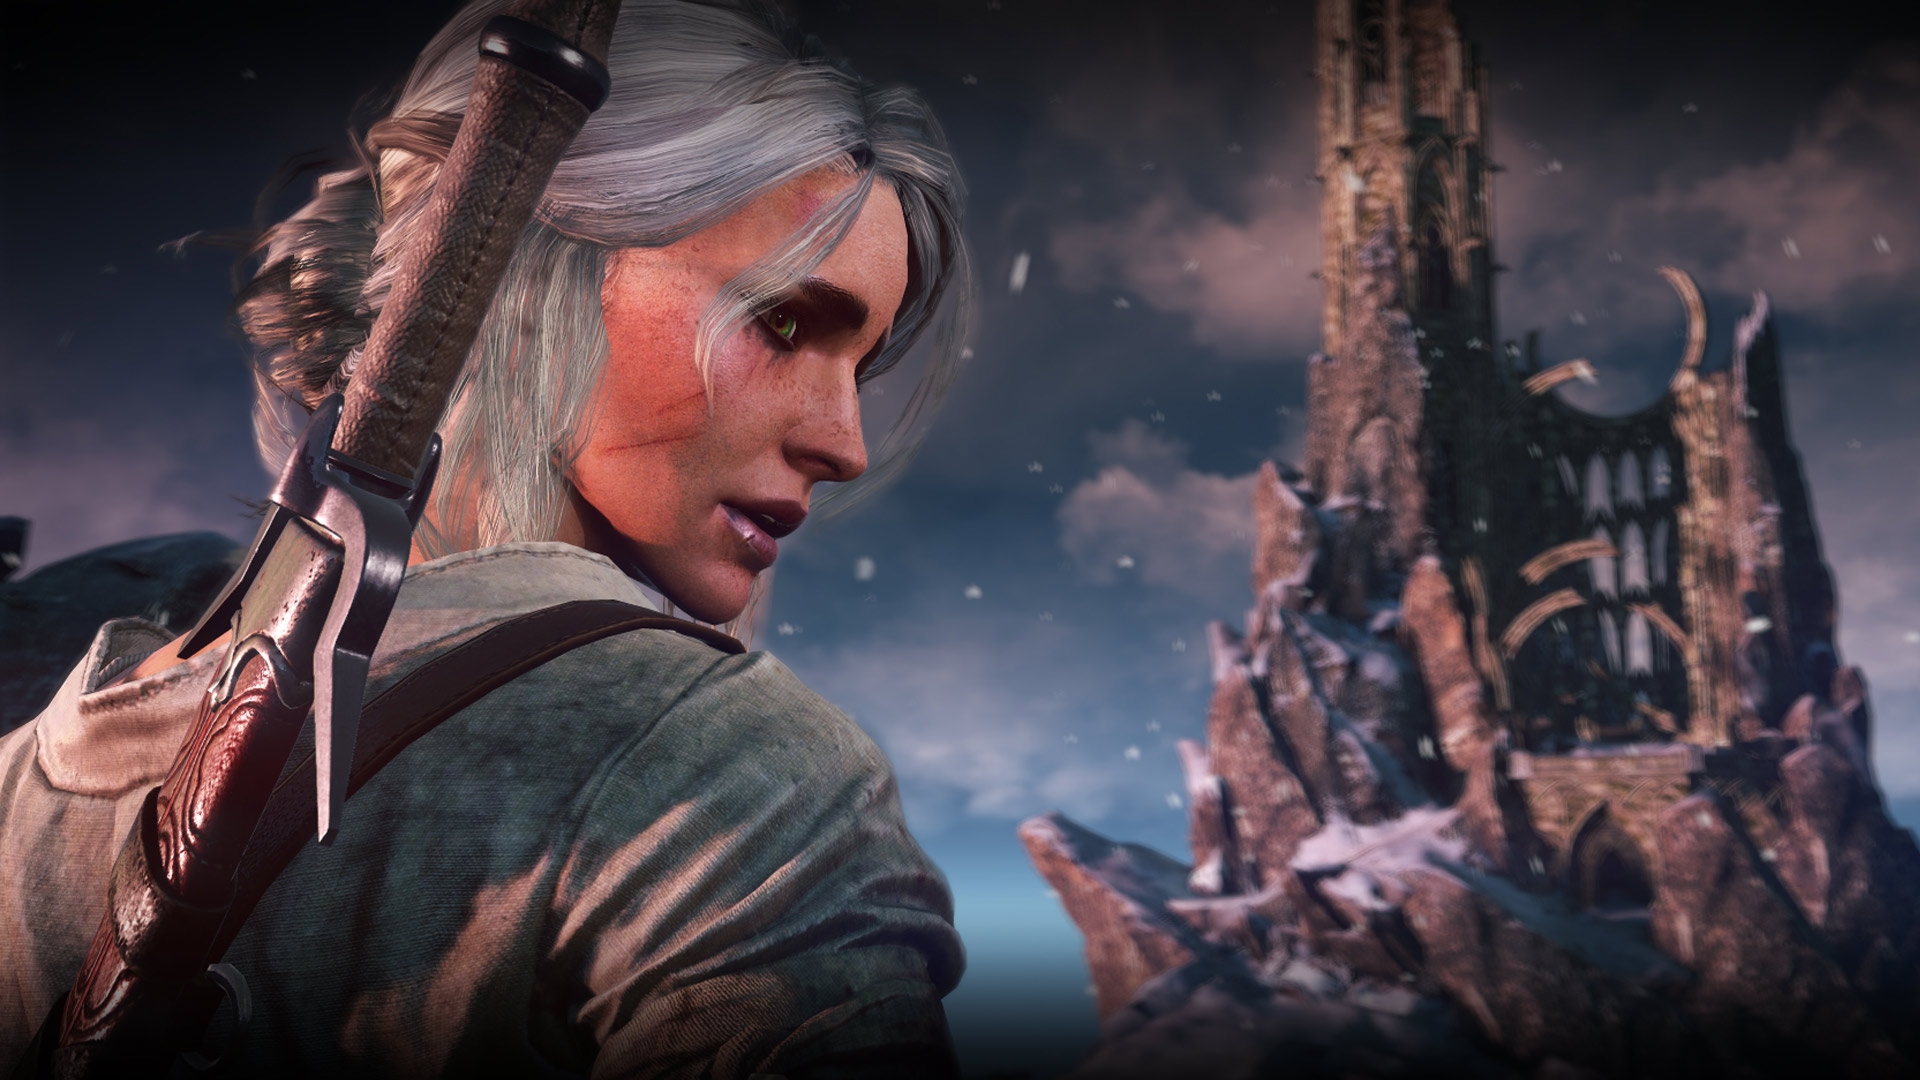 The Witcher 4 Release Date All The Latest Details On The New Witcher Game Pcgamesn